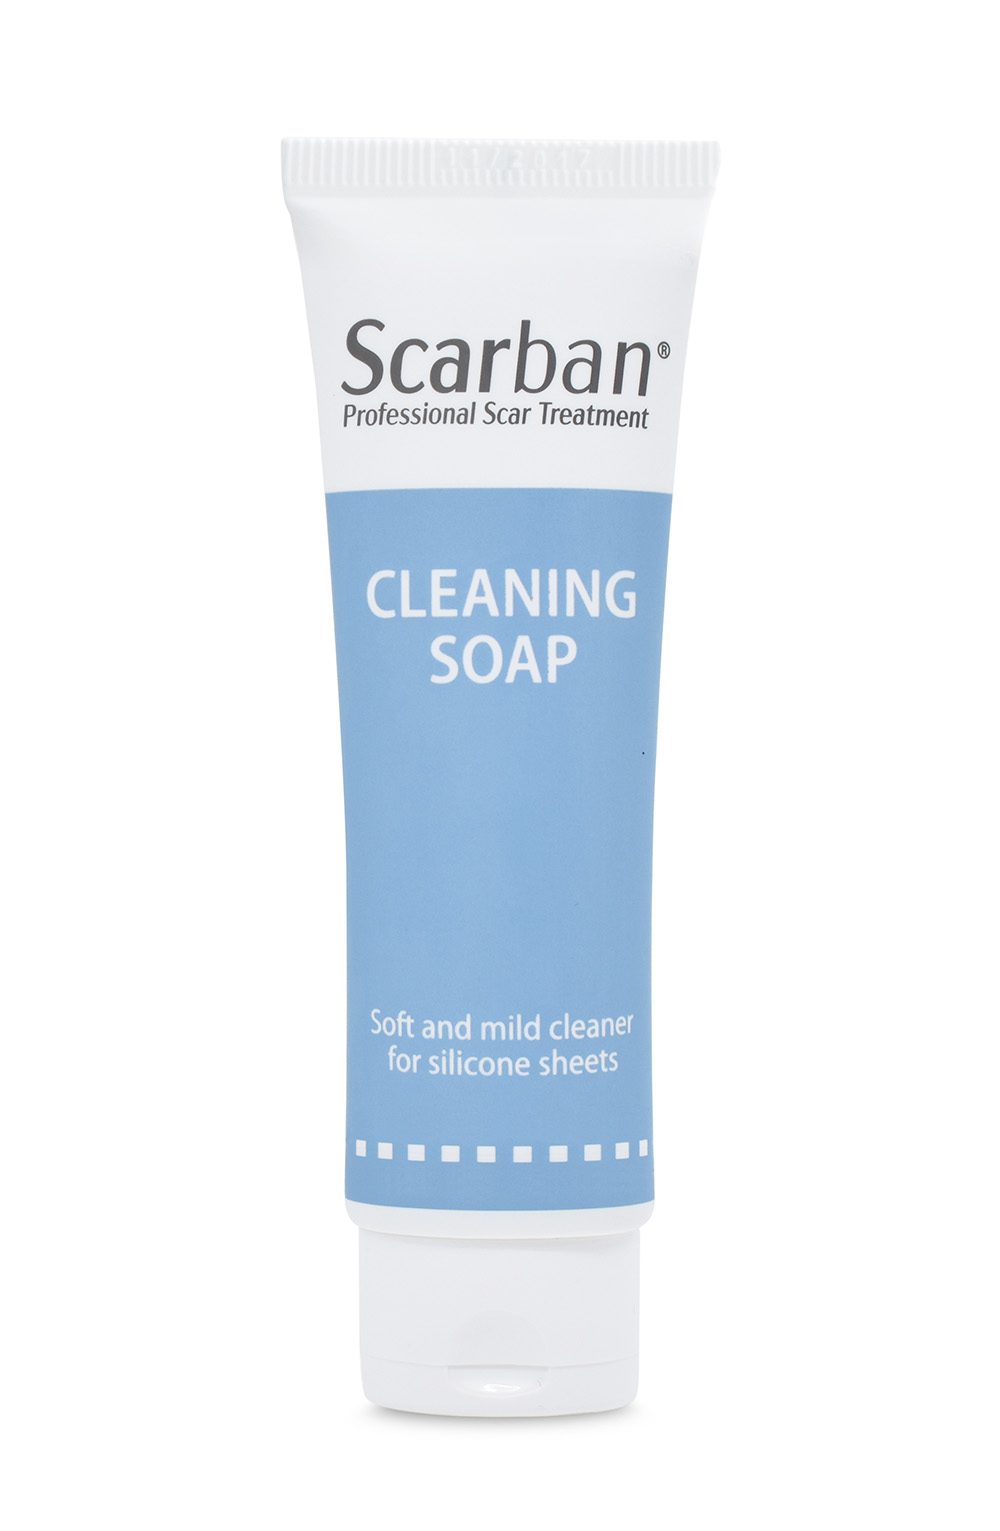 Scarban packaging – SB-Cleaning.soap